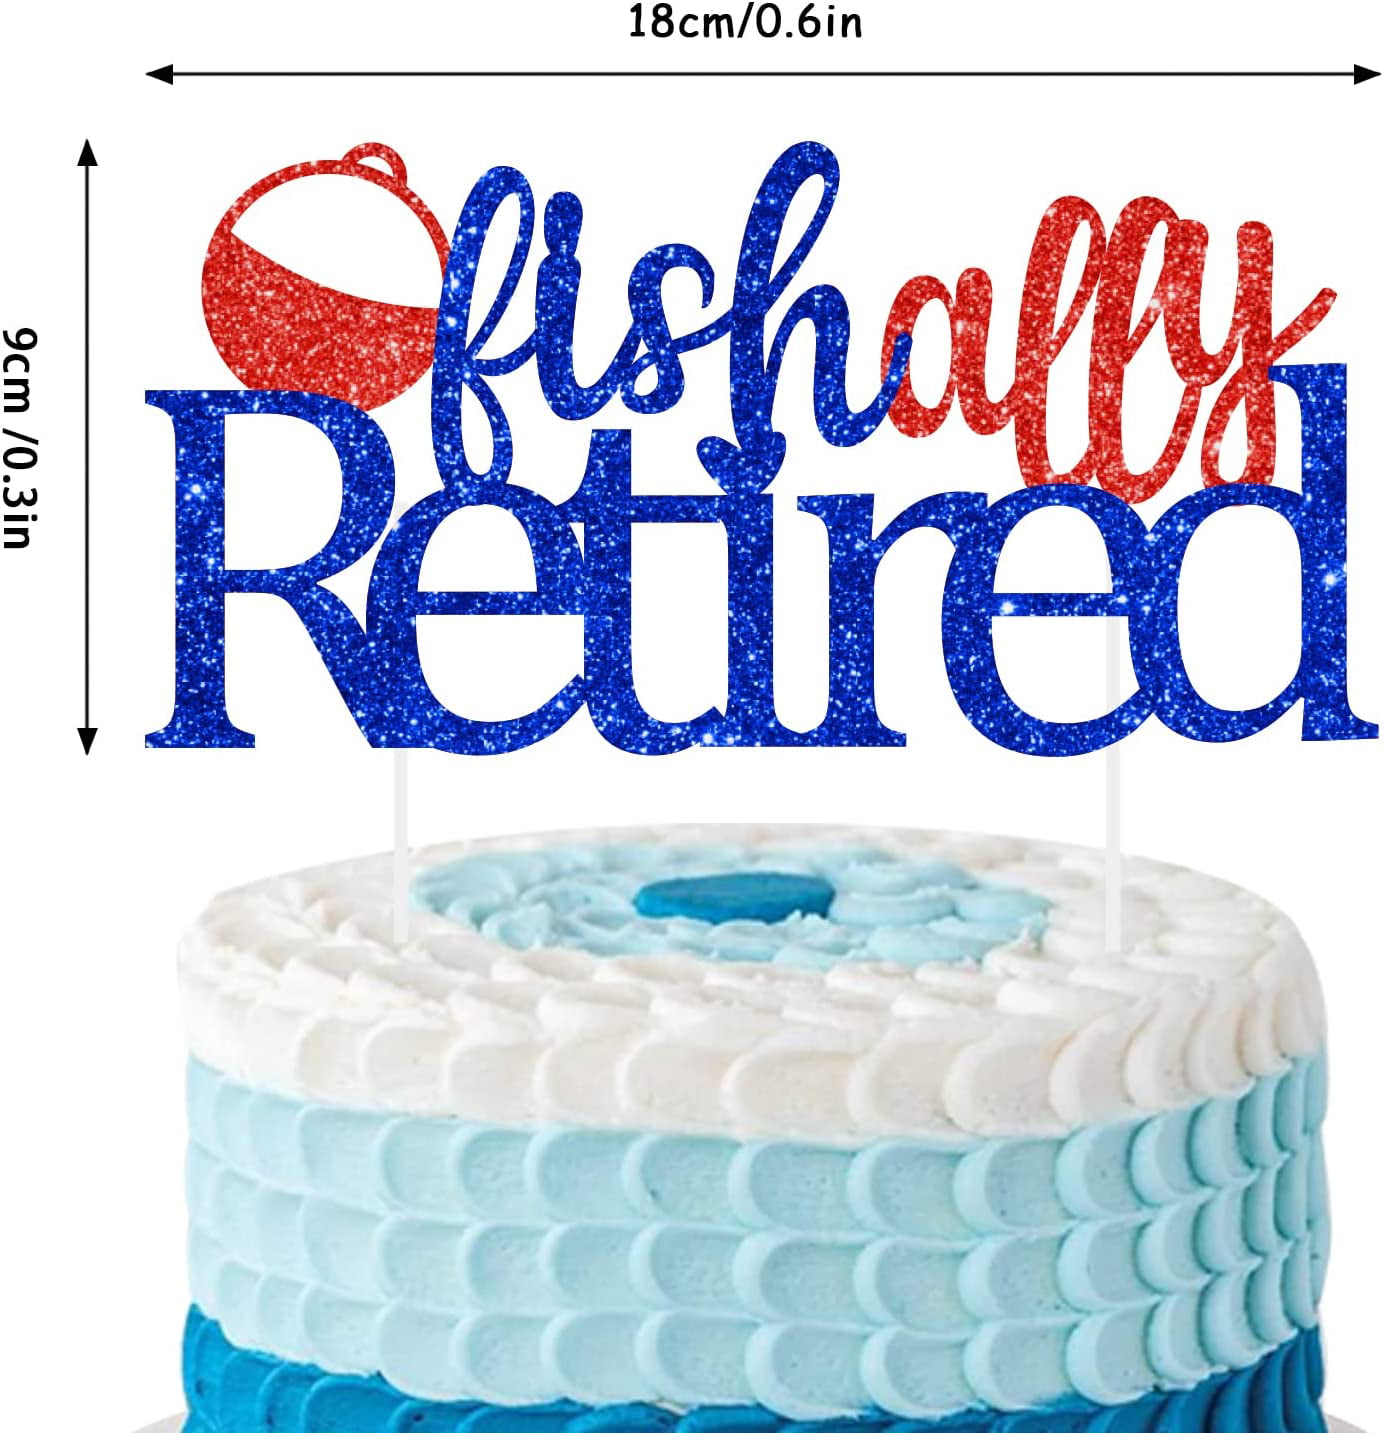 Retirement Cake Ideas And Cake Toppers - Cake Decorations & Toppers